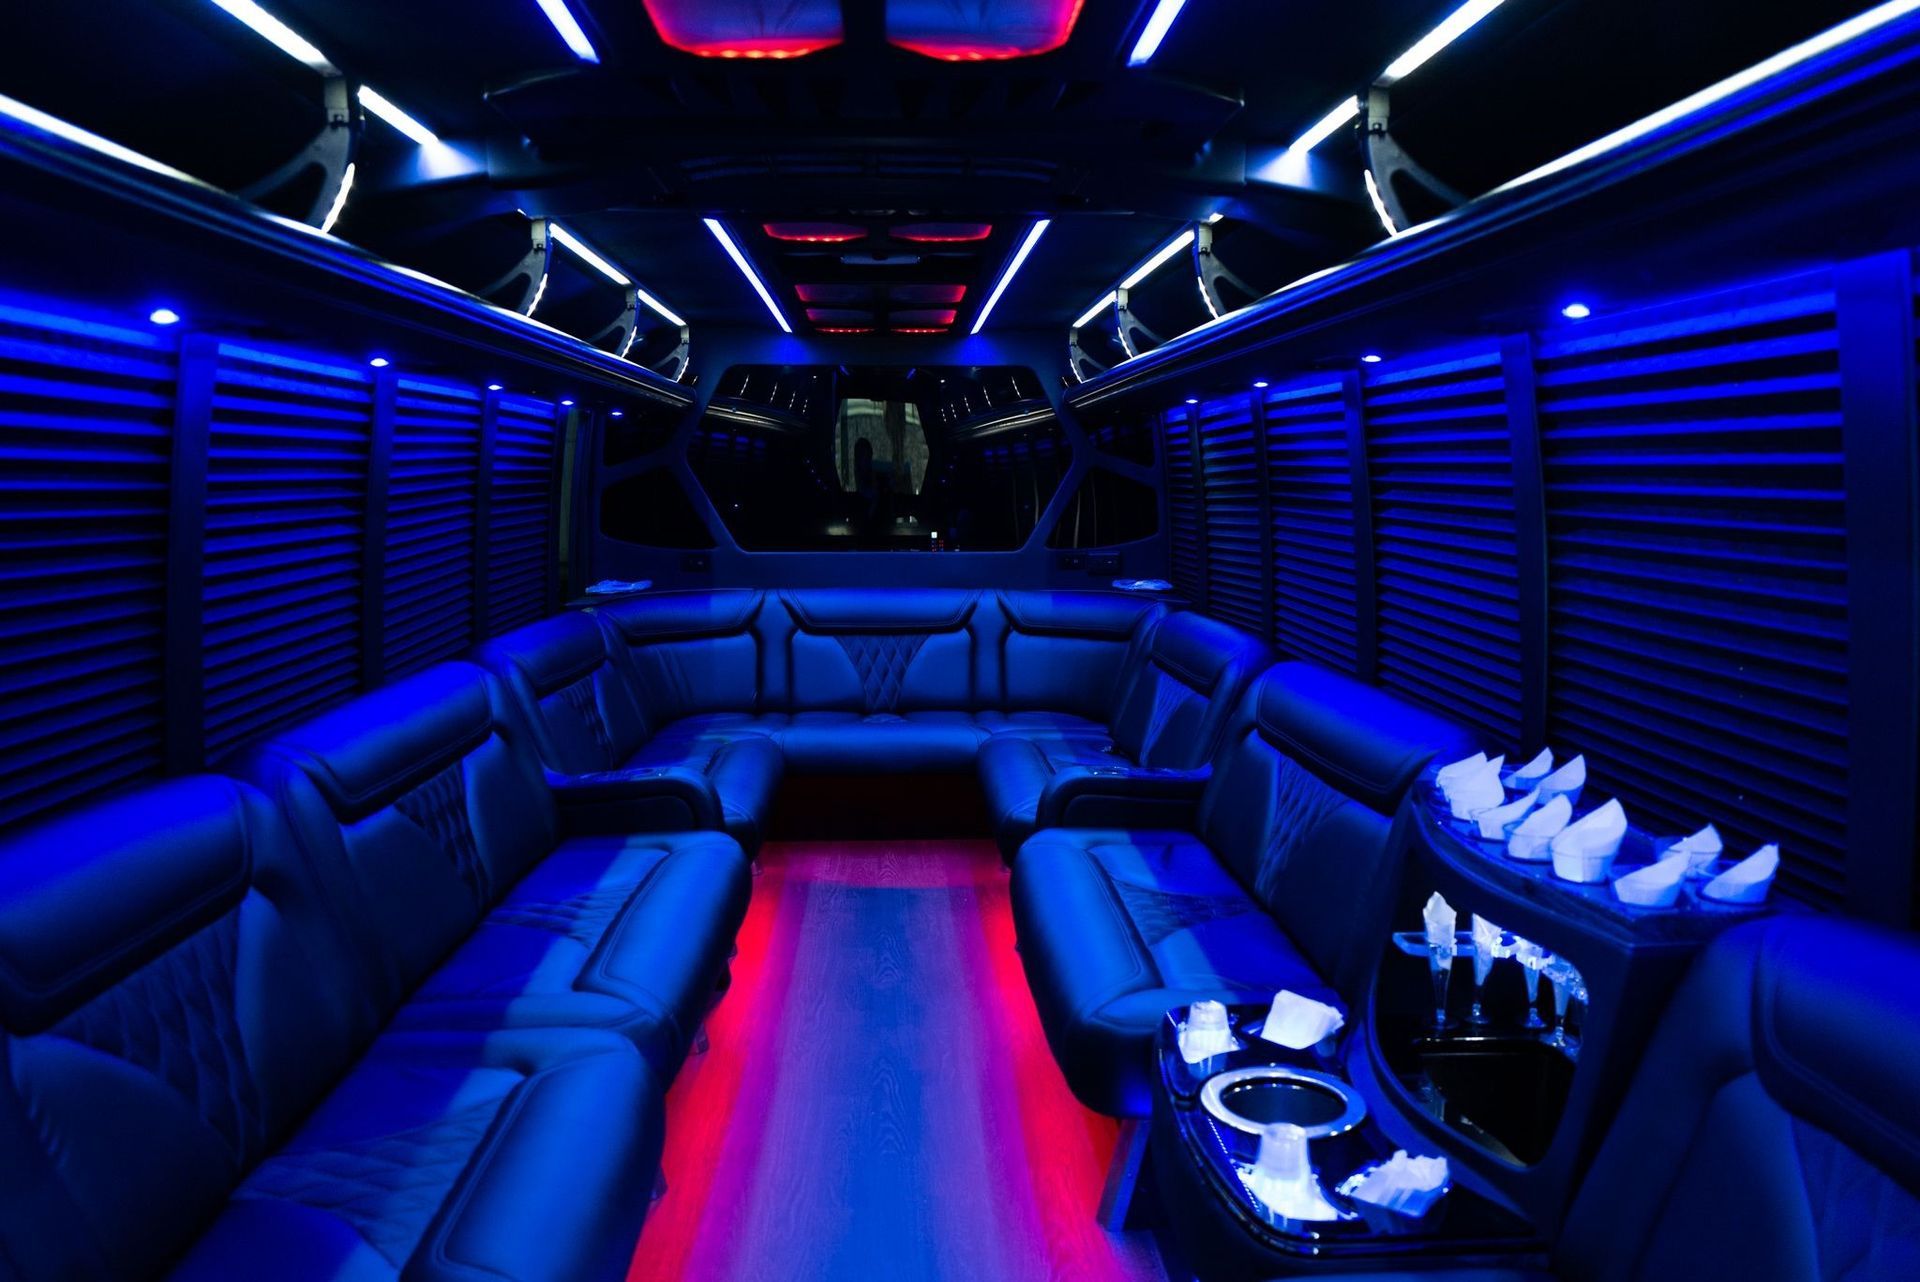 Stretch limo interior - red and blue lighting